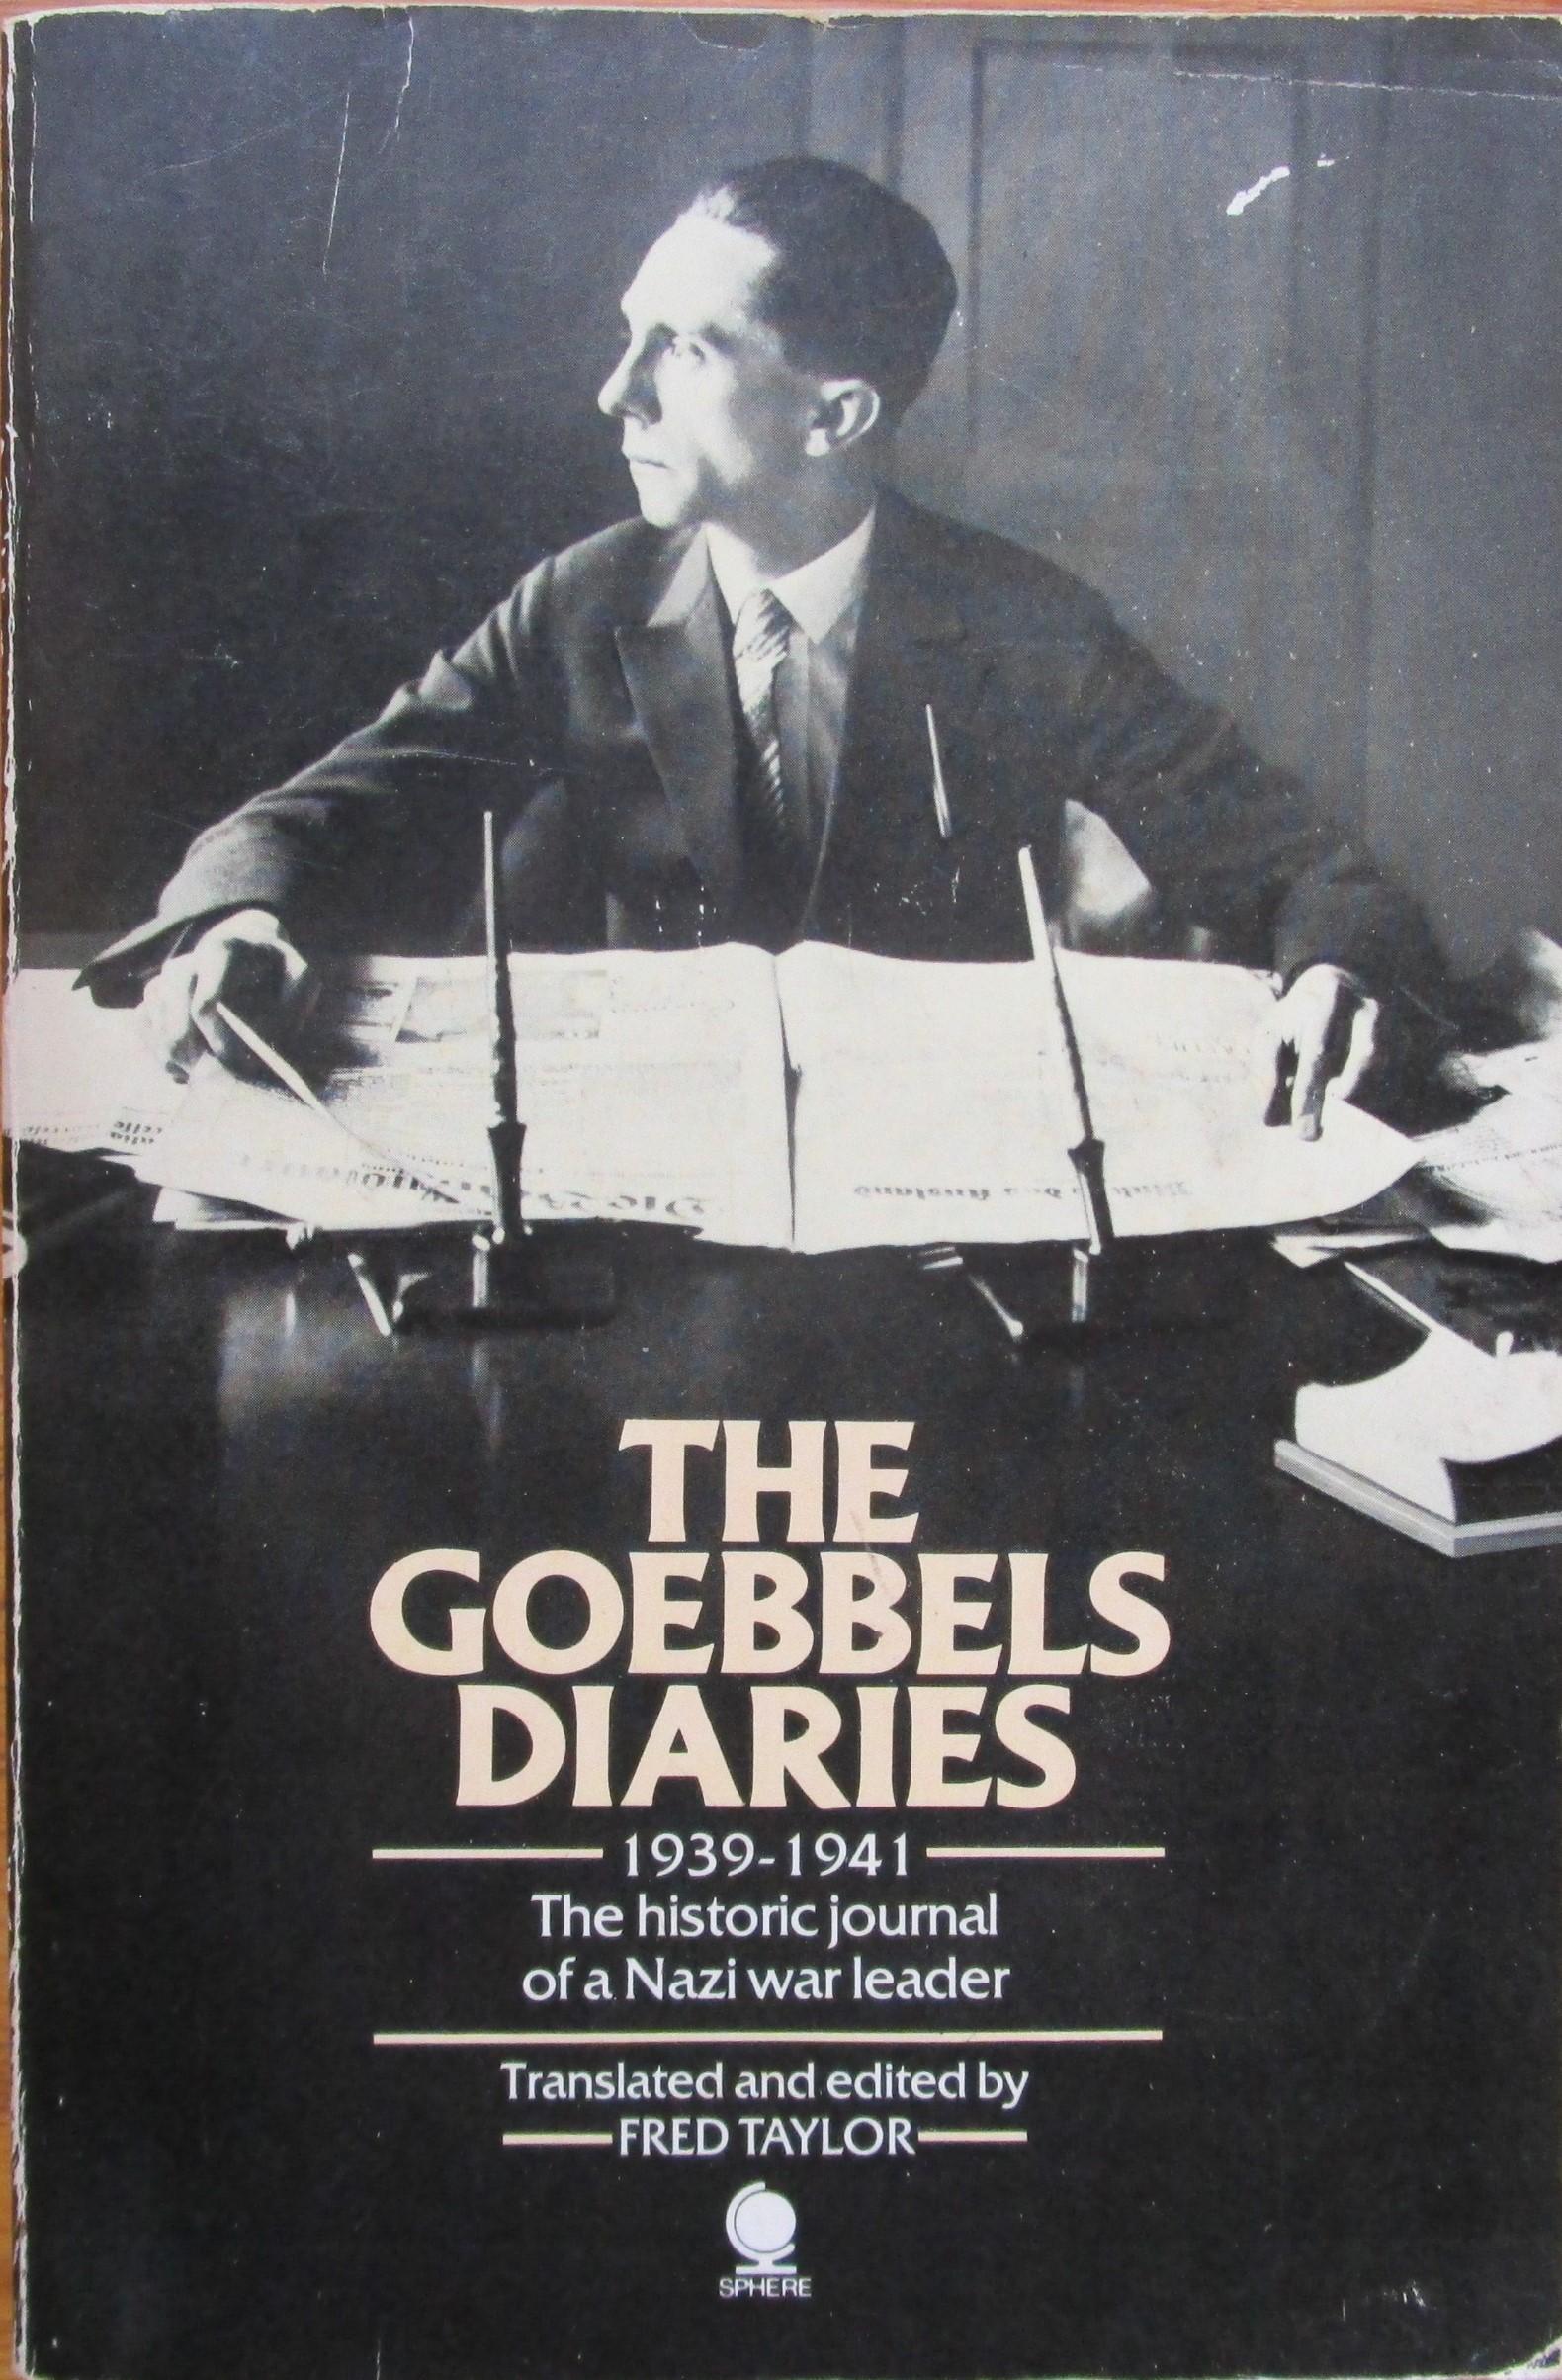 The Goebbels Diaries 1939-1941 the Historic Journal of a Nazi War Leader - Taylor, Fred (tranlator & editor)